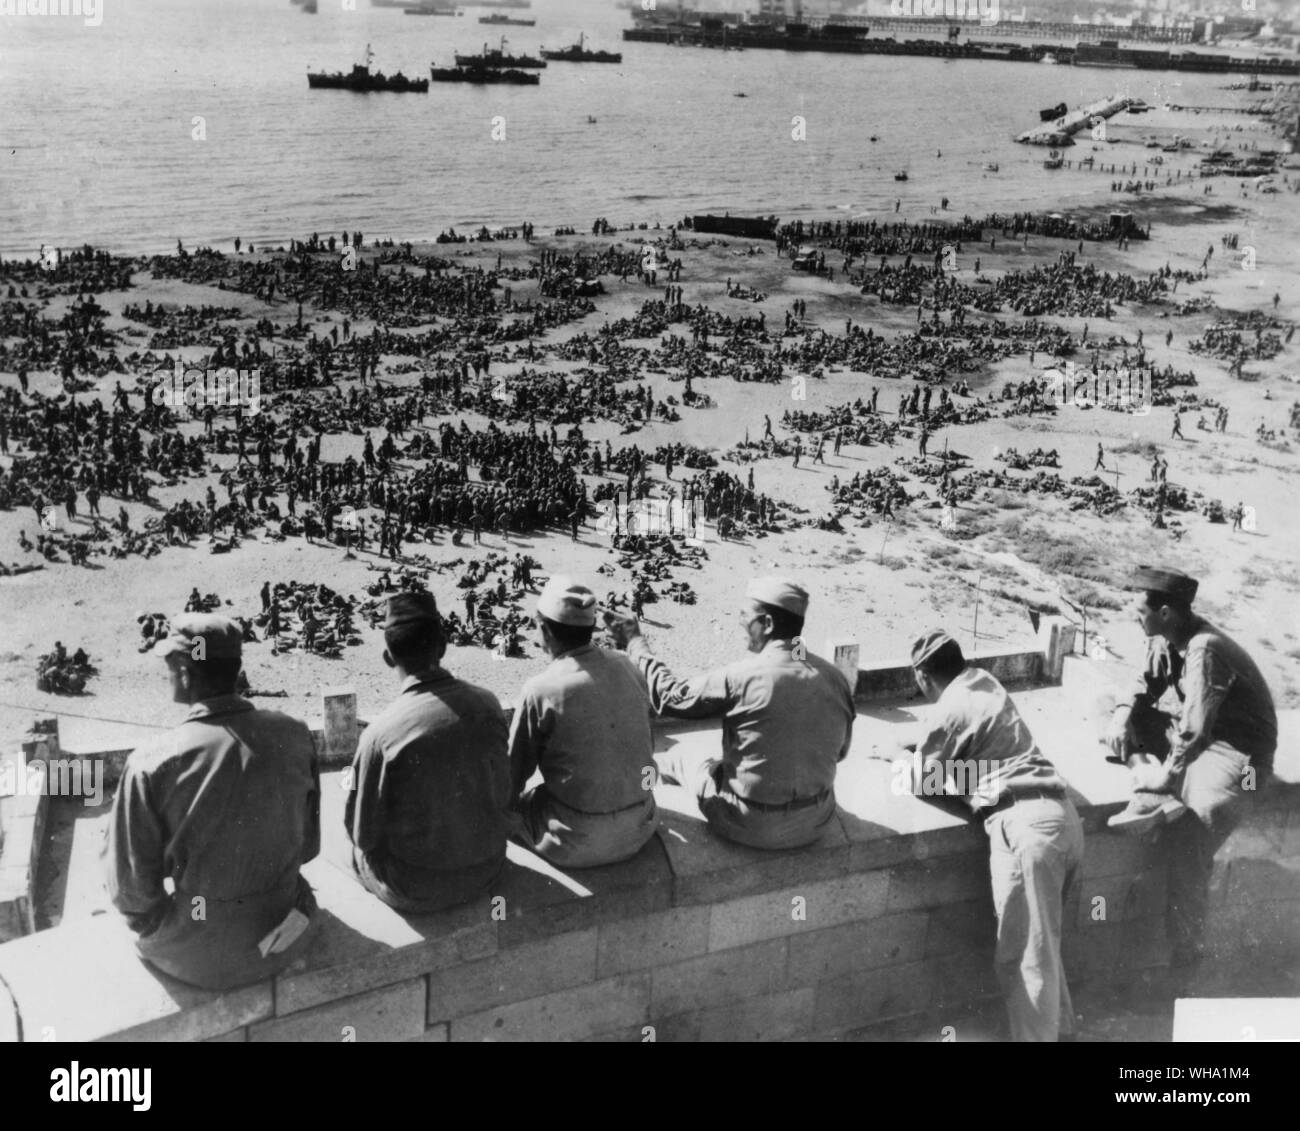 WW2: Invasion loading. Thousands of infantrymen of the 3rd Division on an Italian beach waiting to board landing craft for the invasion of Southern France. August 10th 1944. Stock Photo